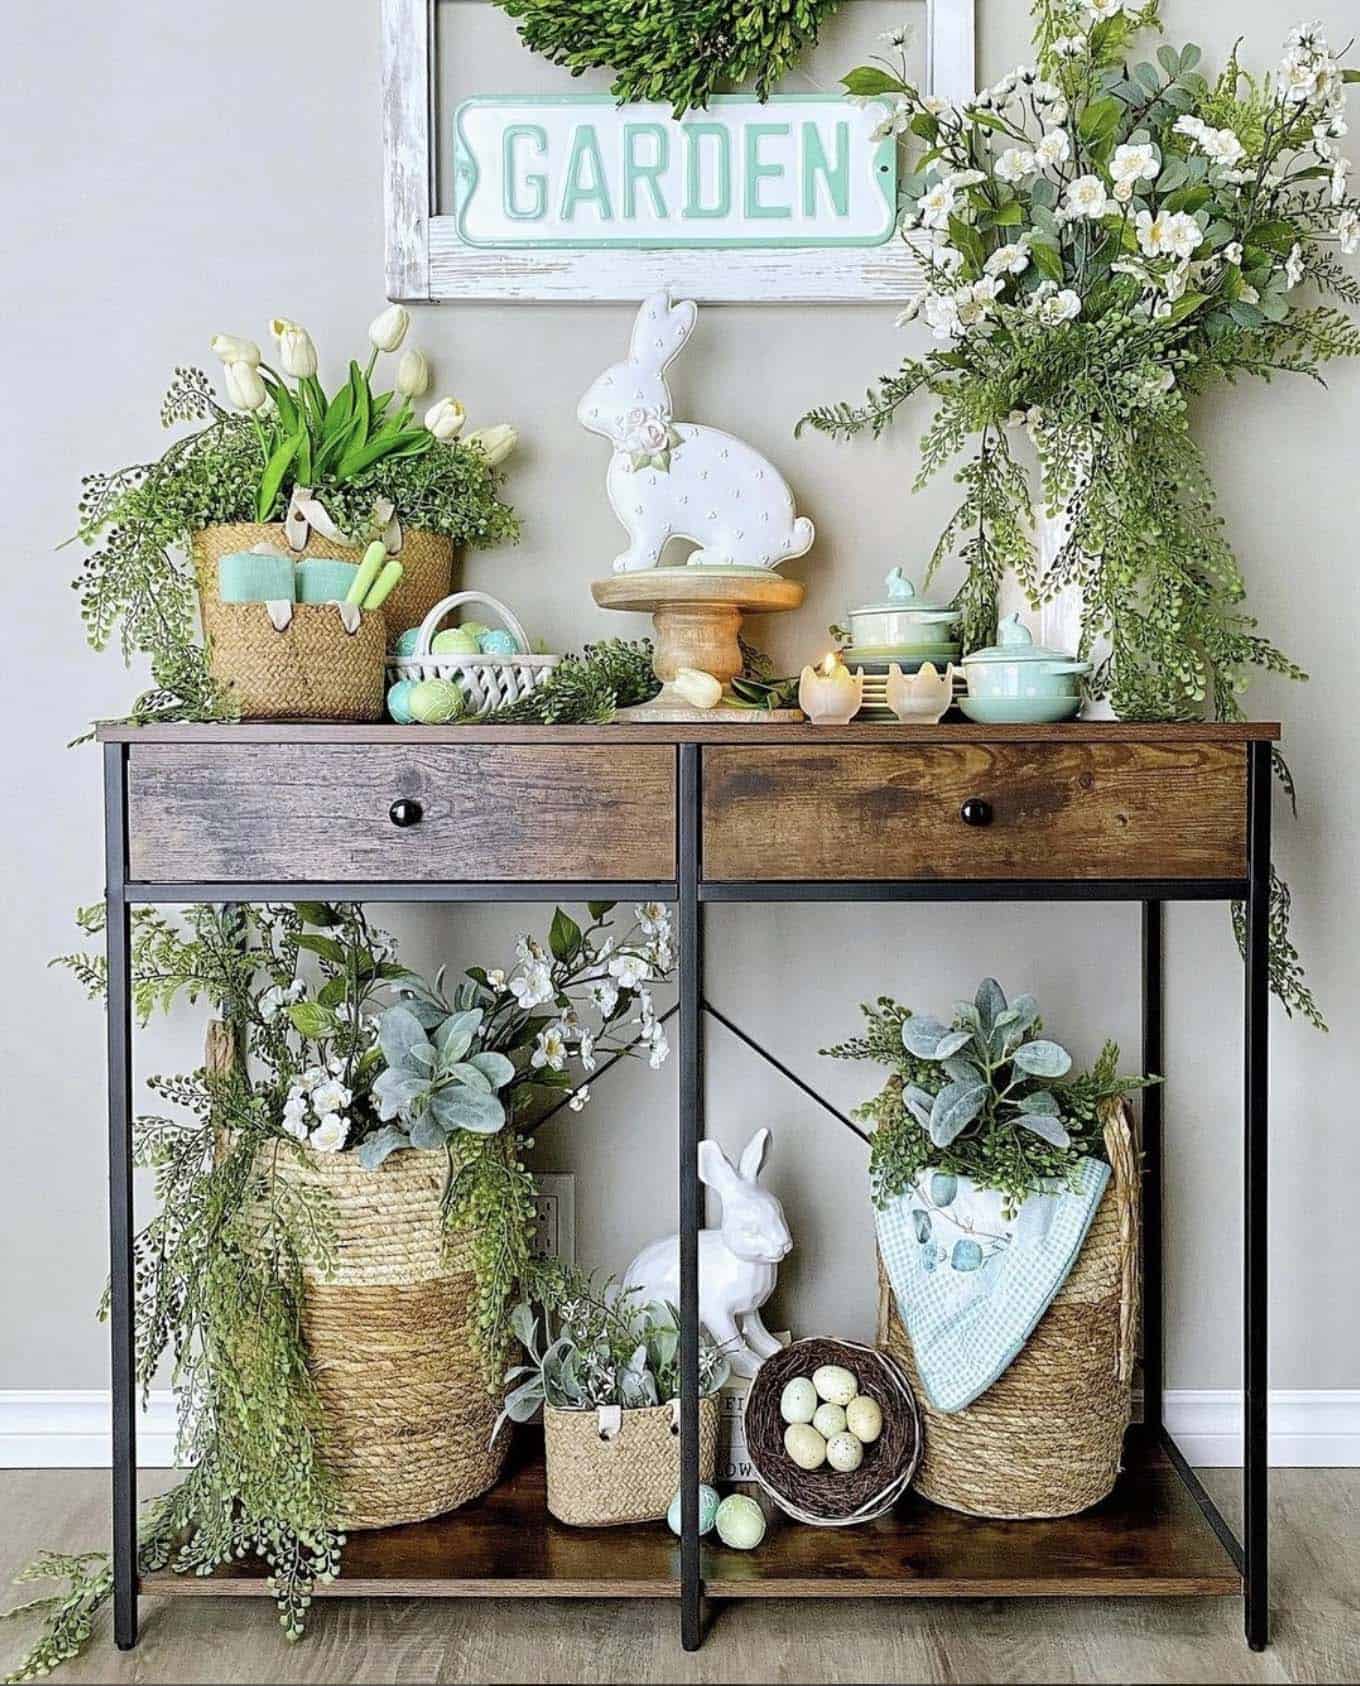 21 Best Ways To Decorate Your Home With Welcoming Spring Vibes